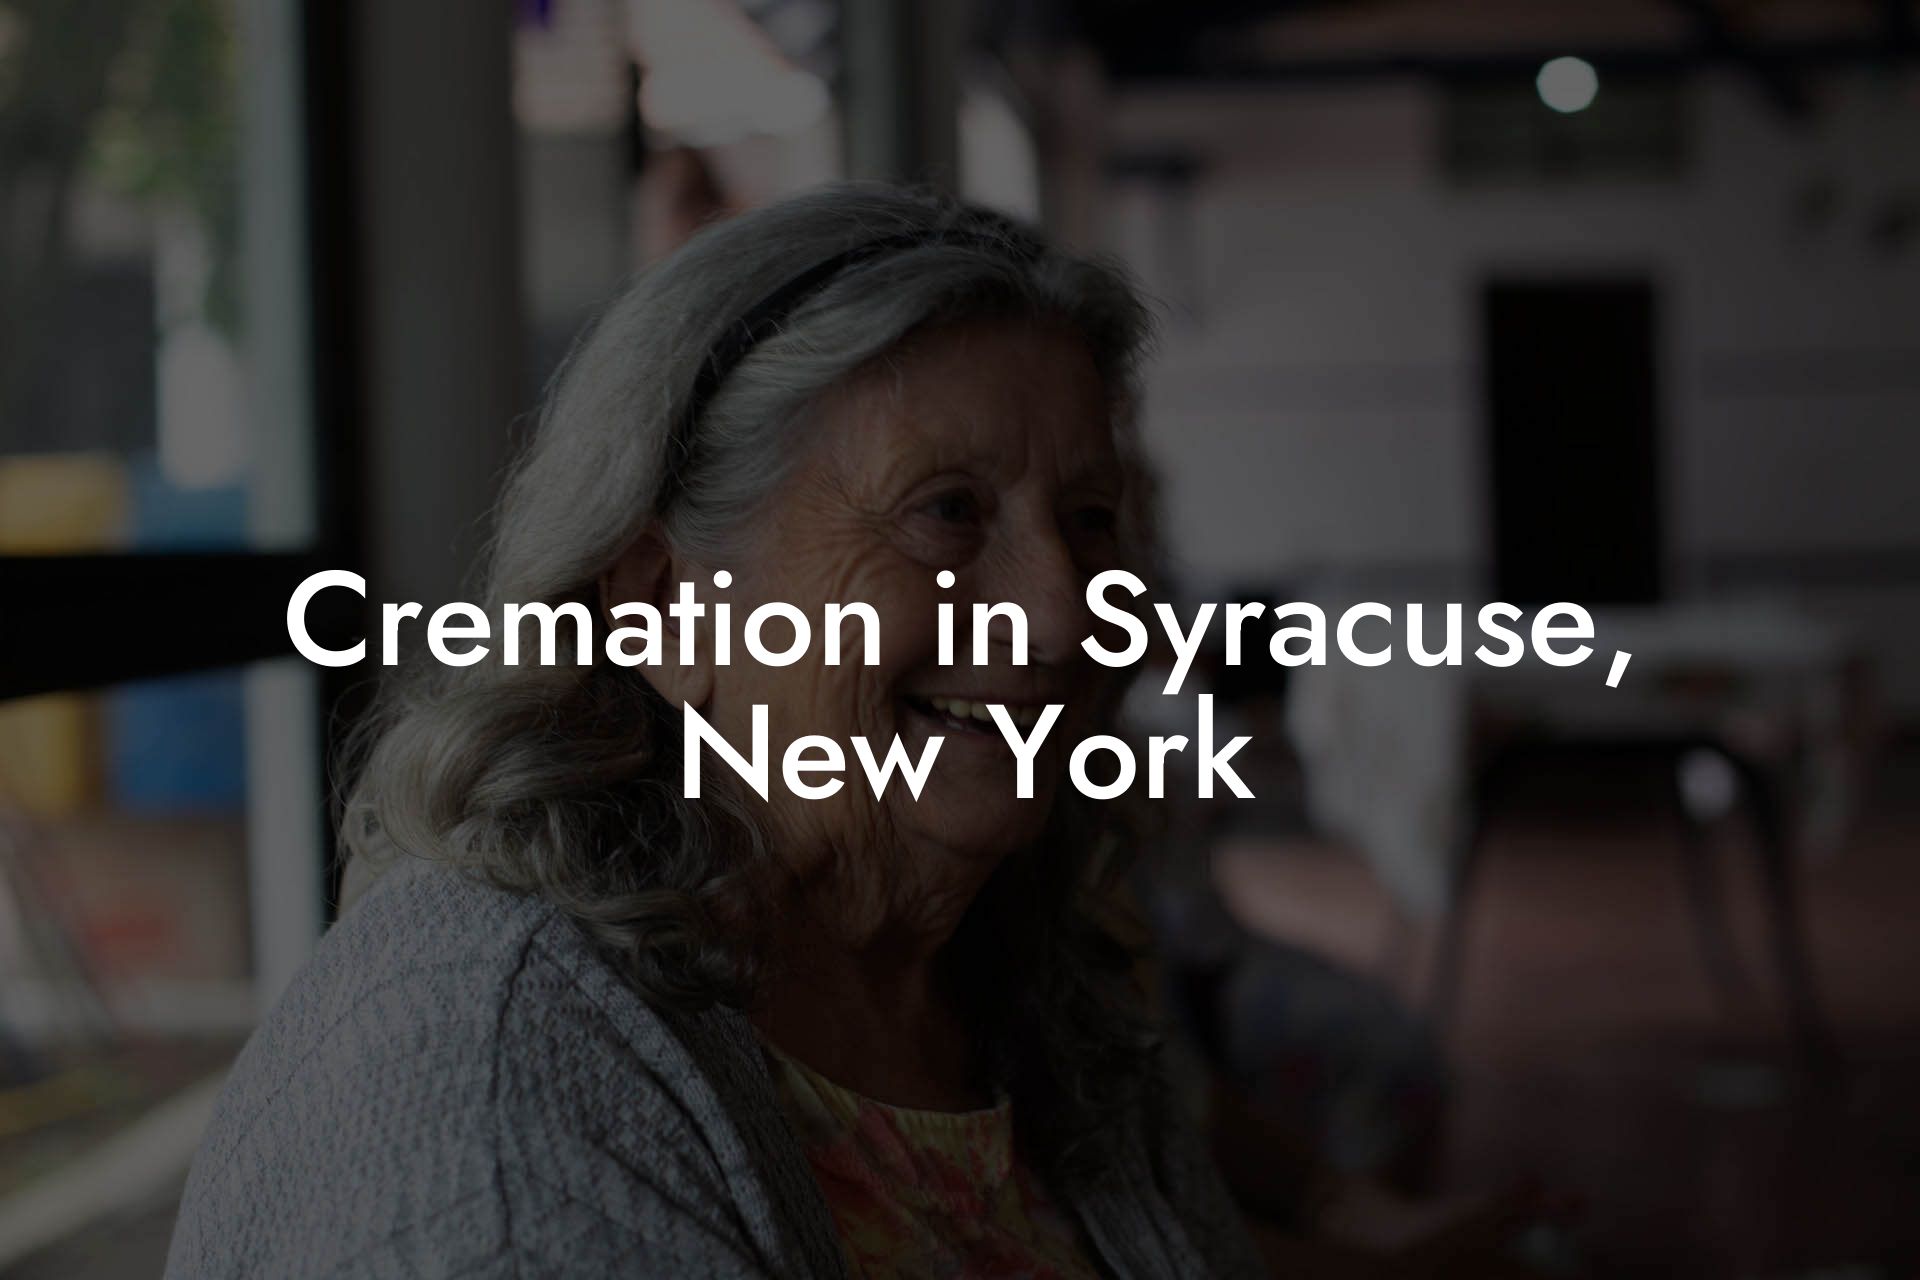 Cremation in Syracuse, New York